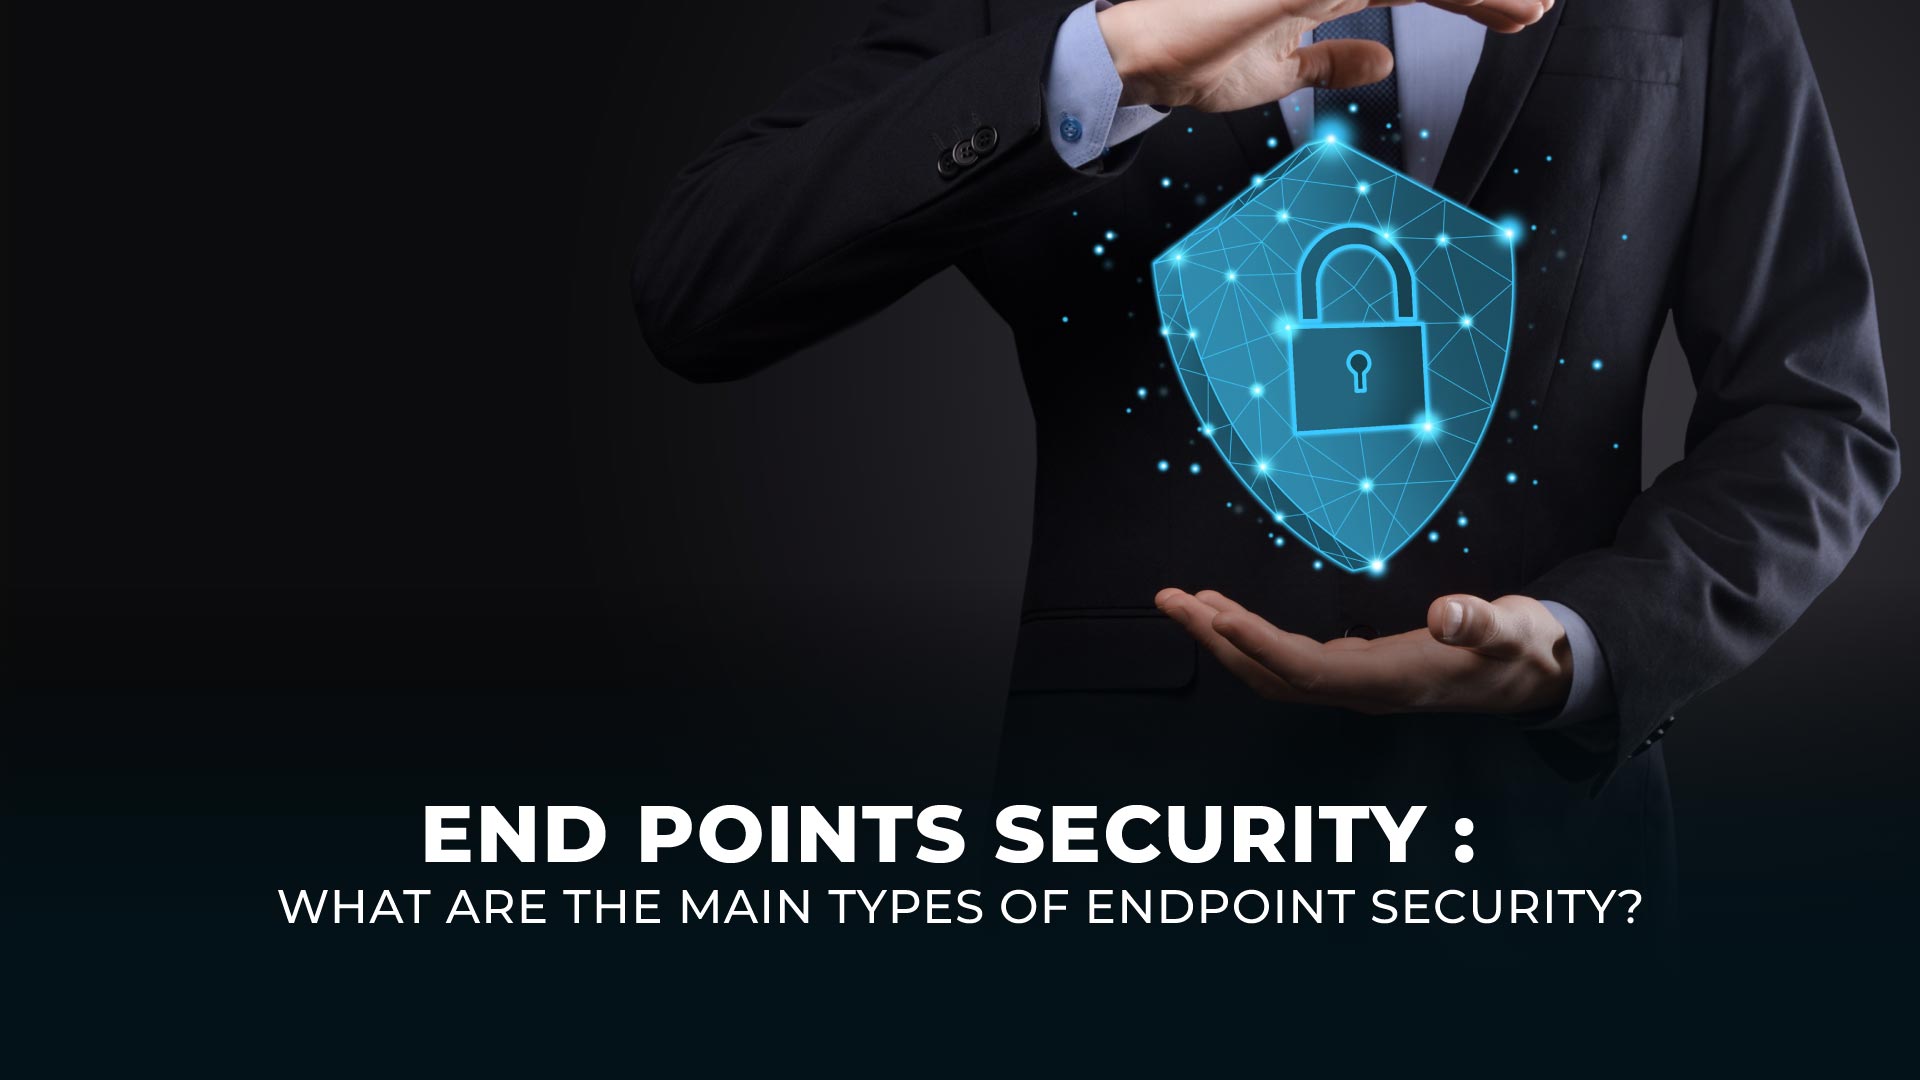 End Points Security: What are the main types of endpoint security?